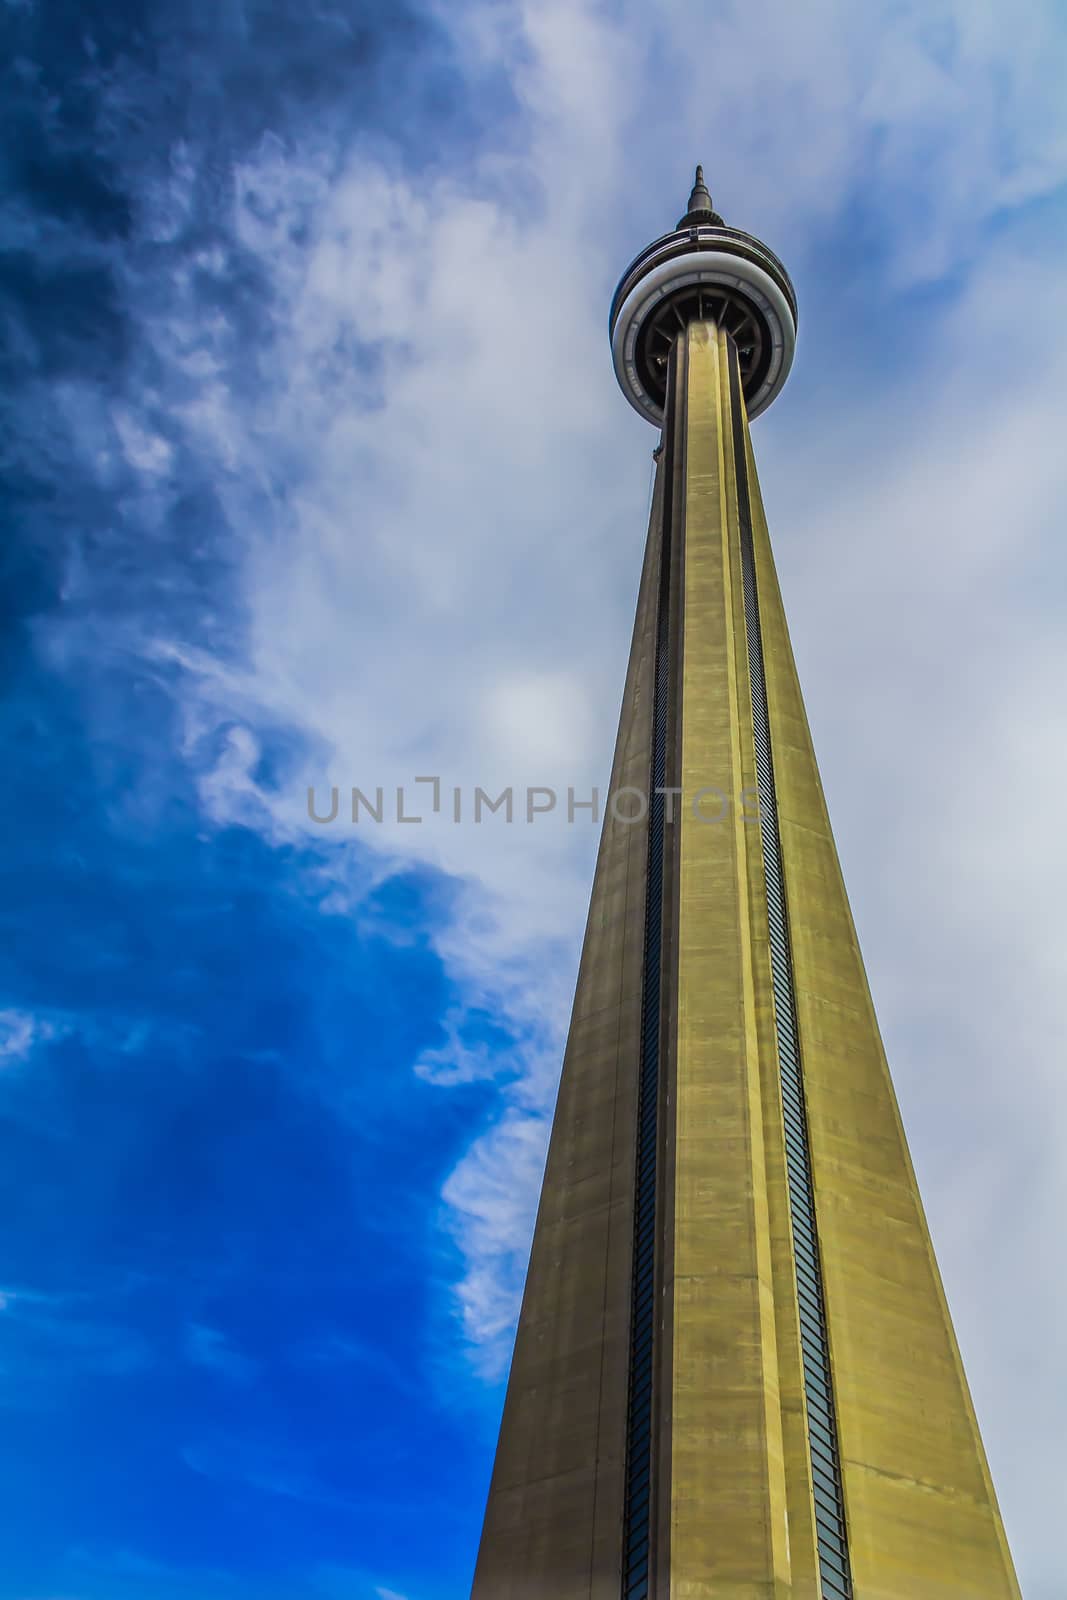 The CN Tower on a blue sky background in beautiful day. Its location is in Toronto, Canada.